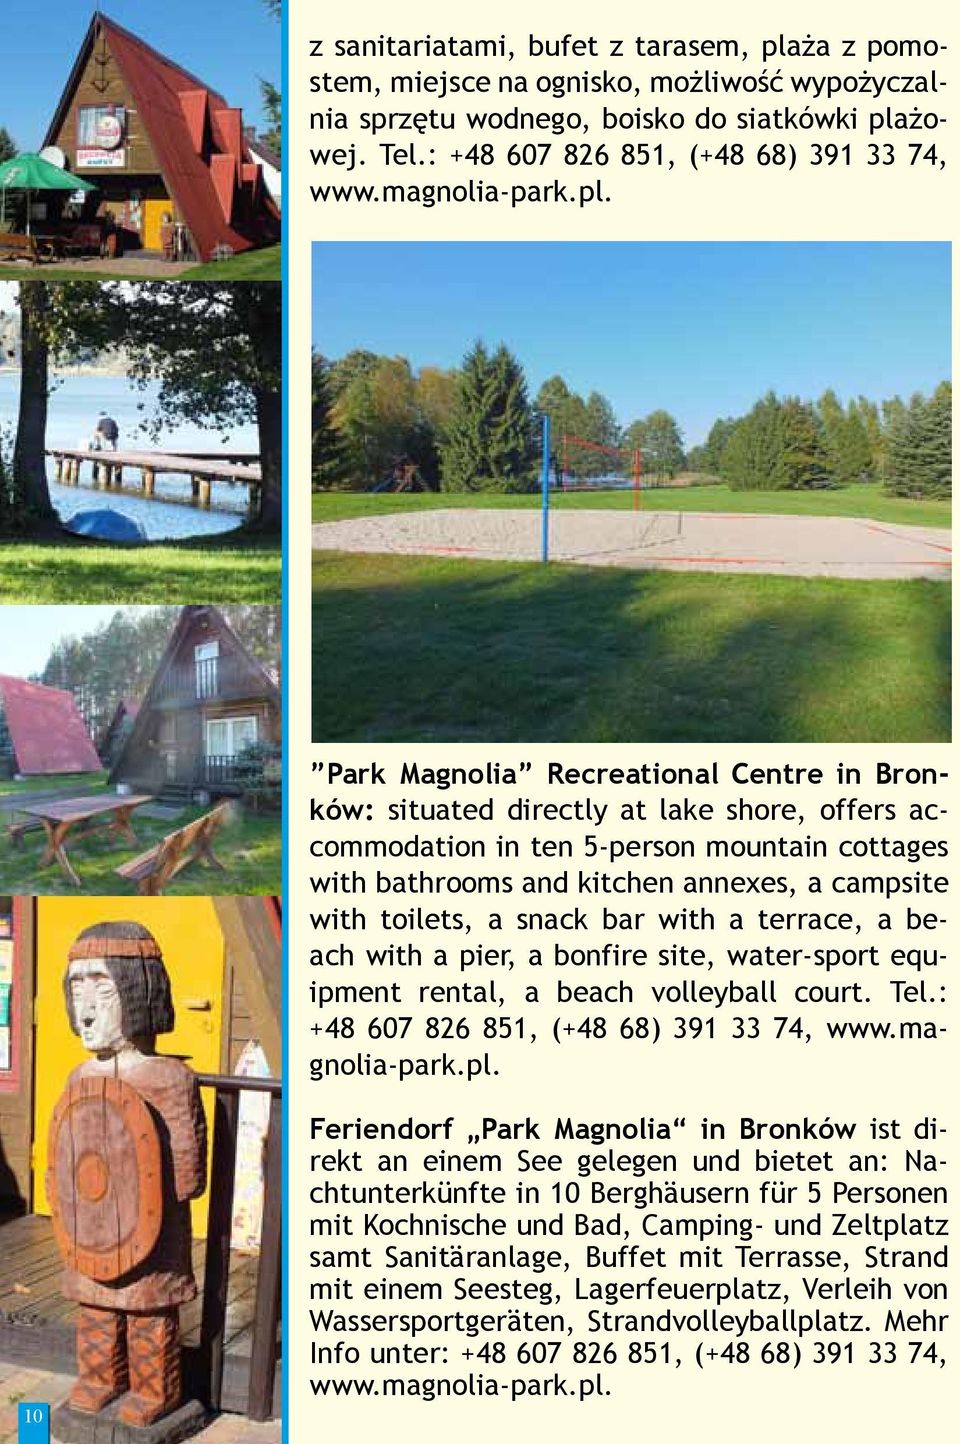 Park Magnolia Recreational Centre in Bronków: situated directly at lake shore, offers accommodation in ten 5-person mountain cottages with bathrooms and kitchen annexes, a campsite with toilets, a